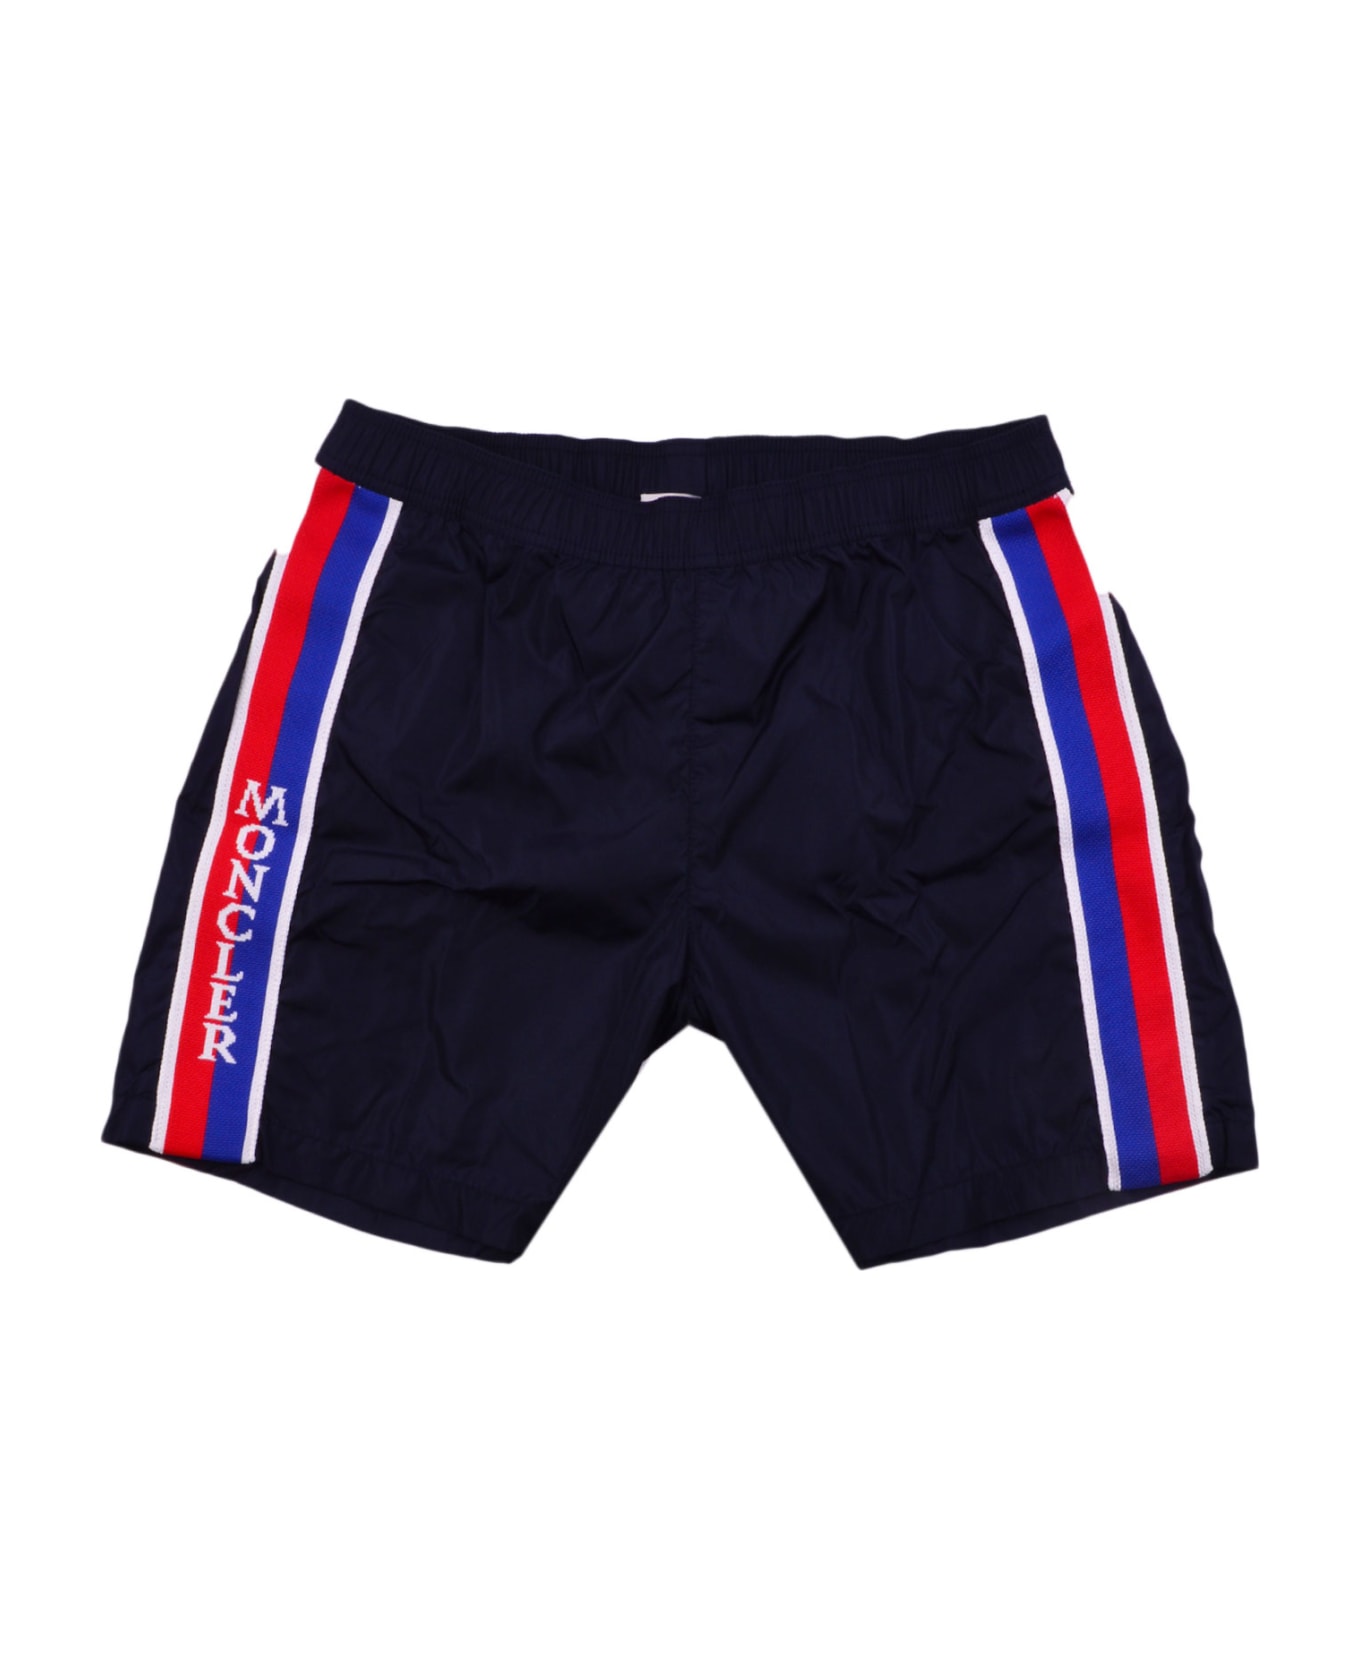 Moncler Shorts Swimsuit With Side Bands - Blue 水着